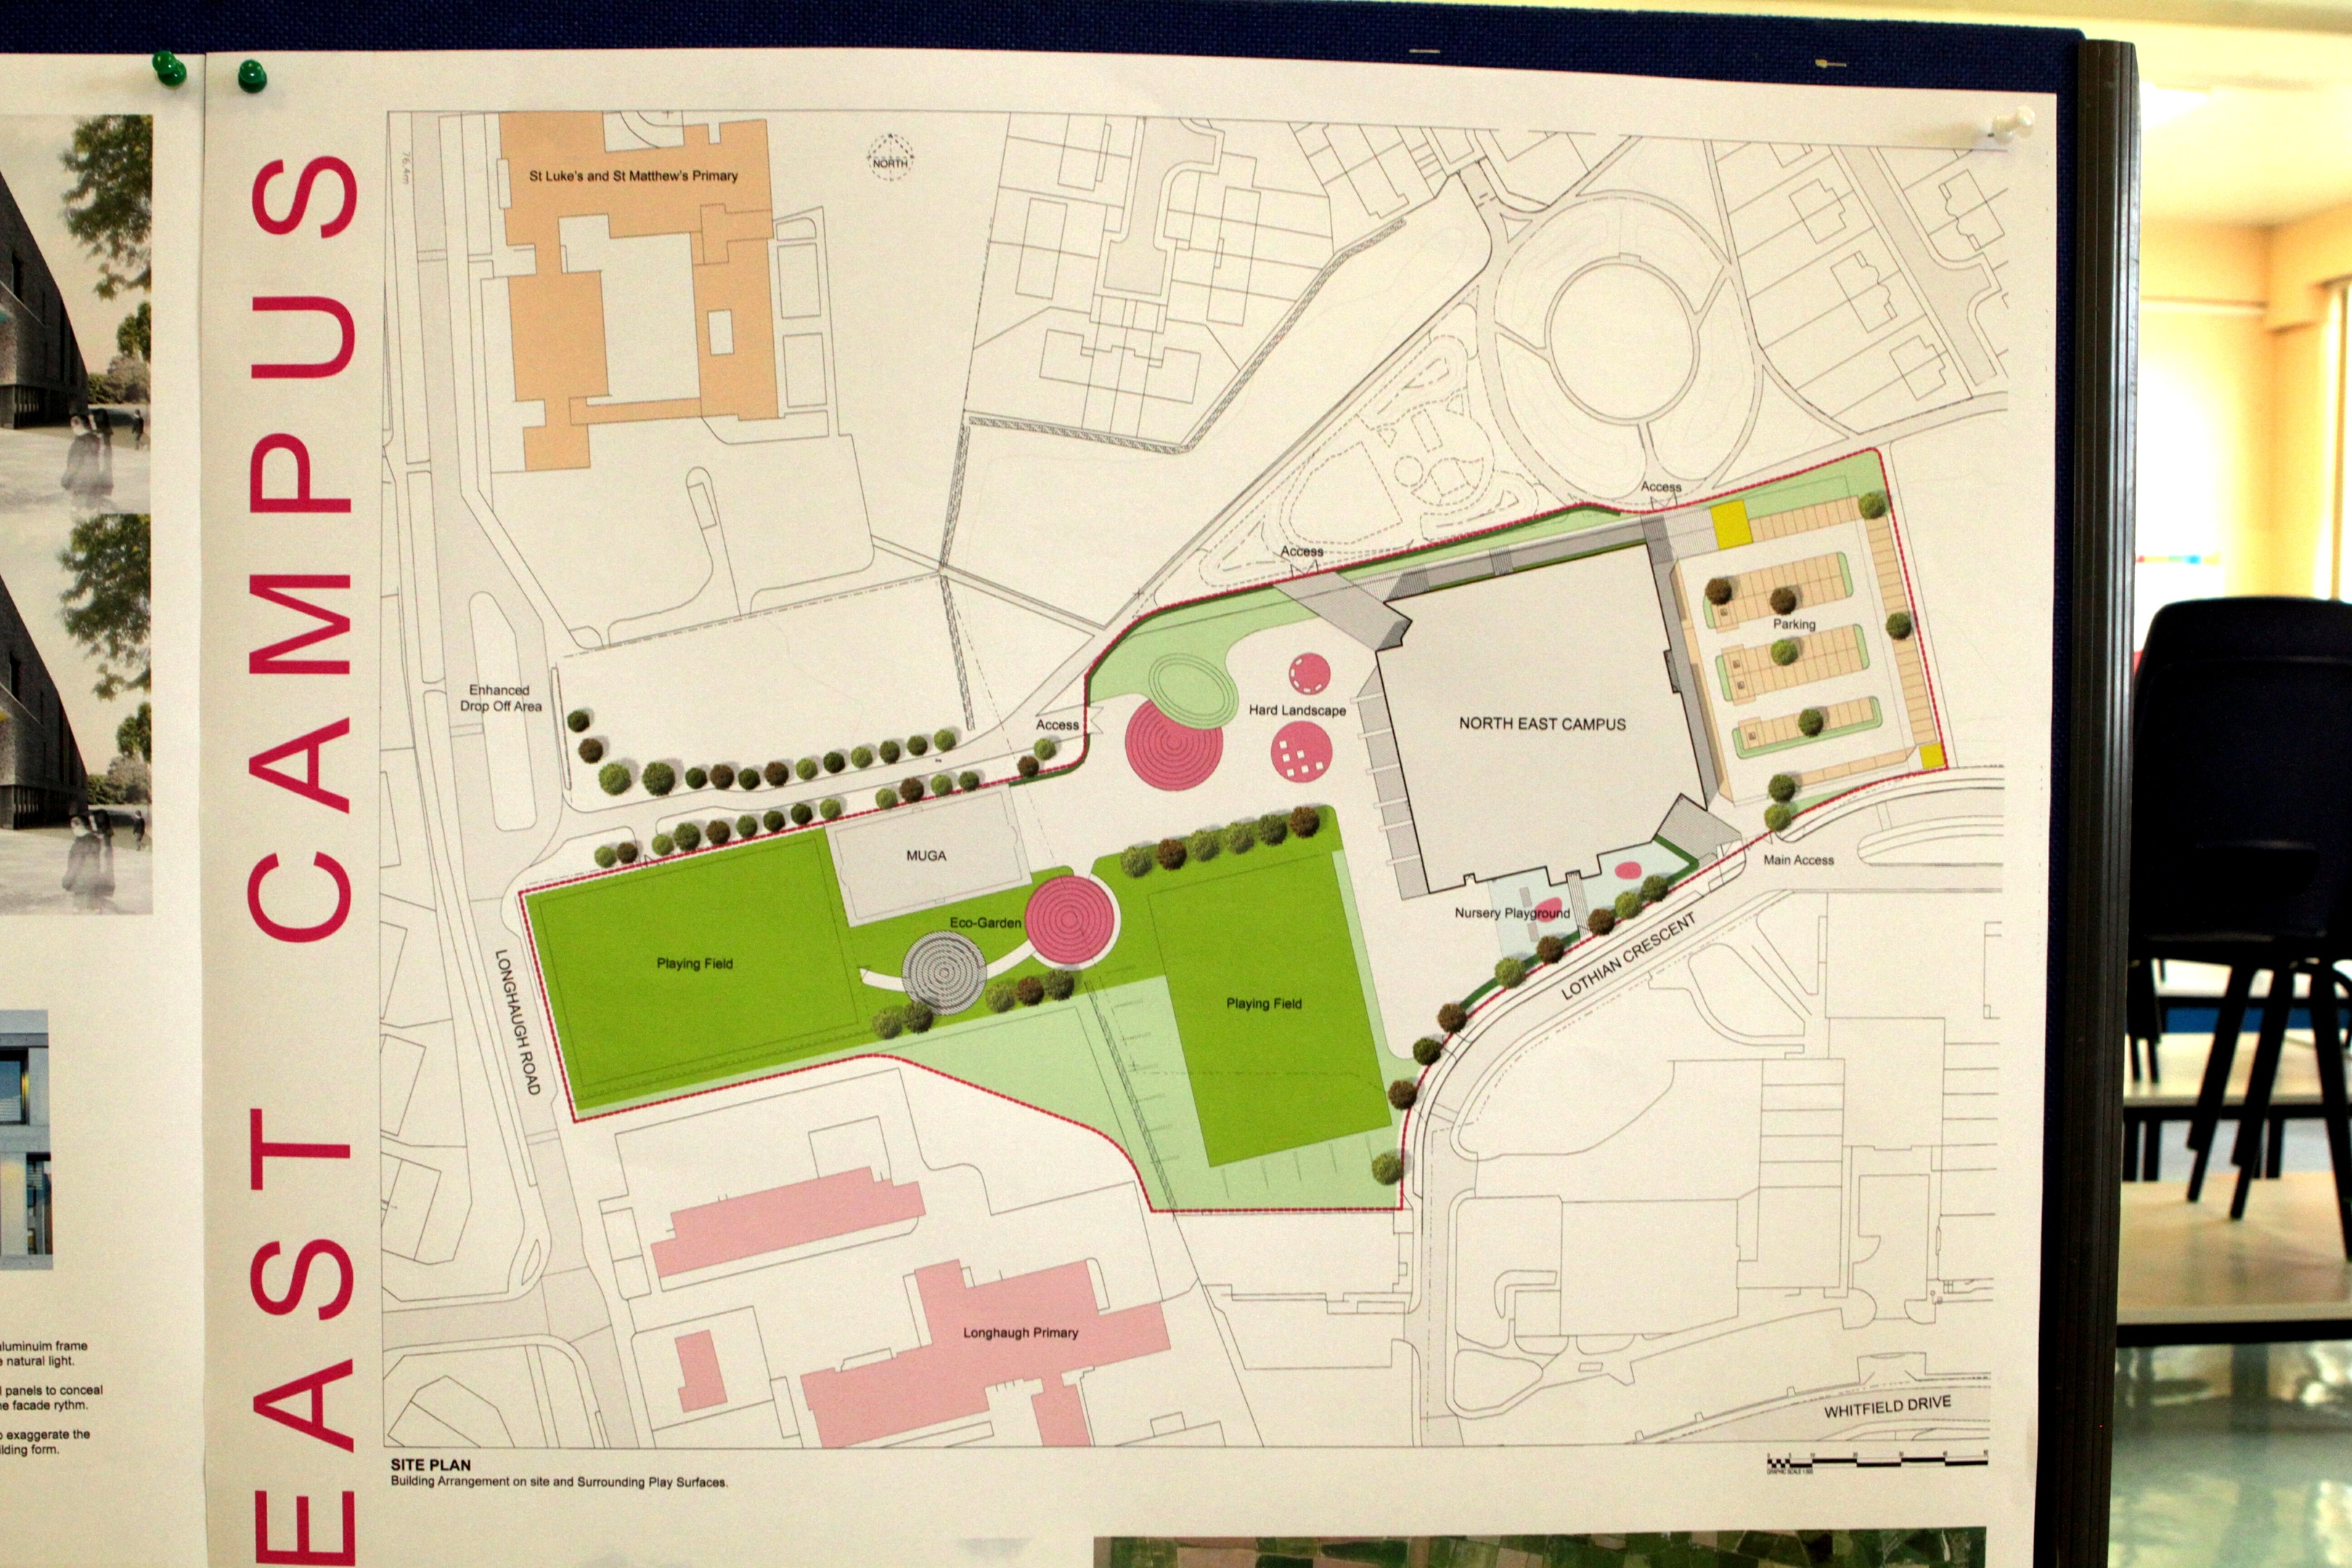 Plans for the new campus.